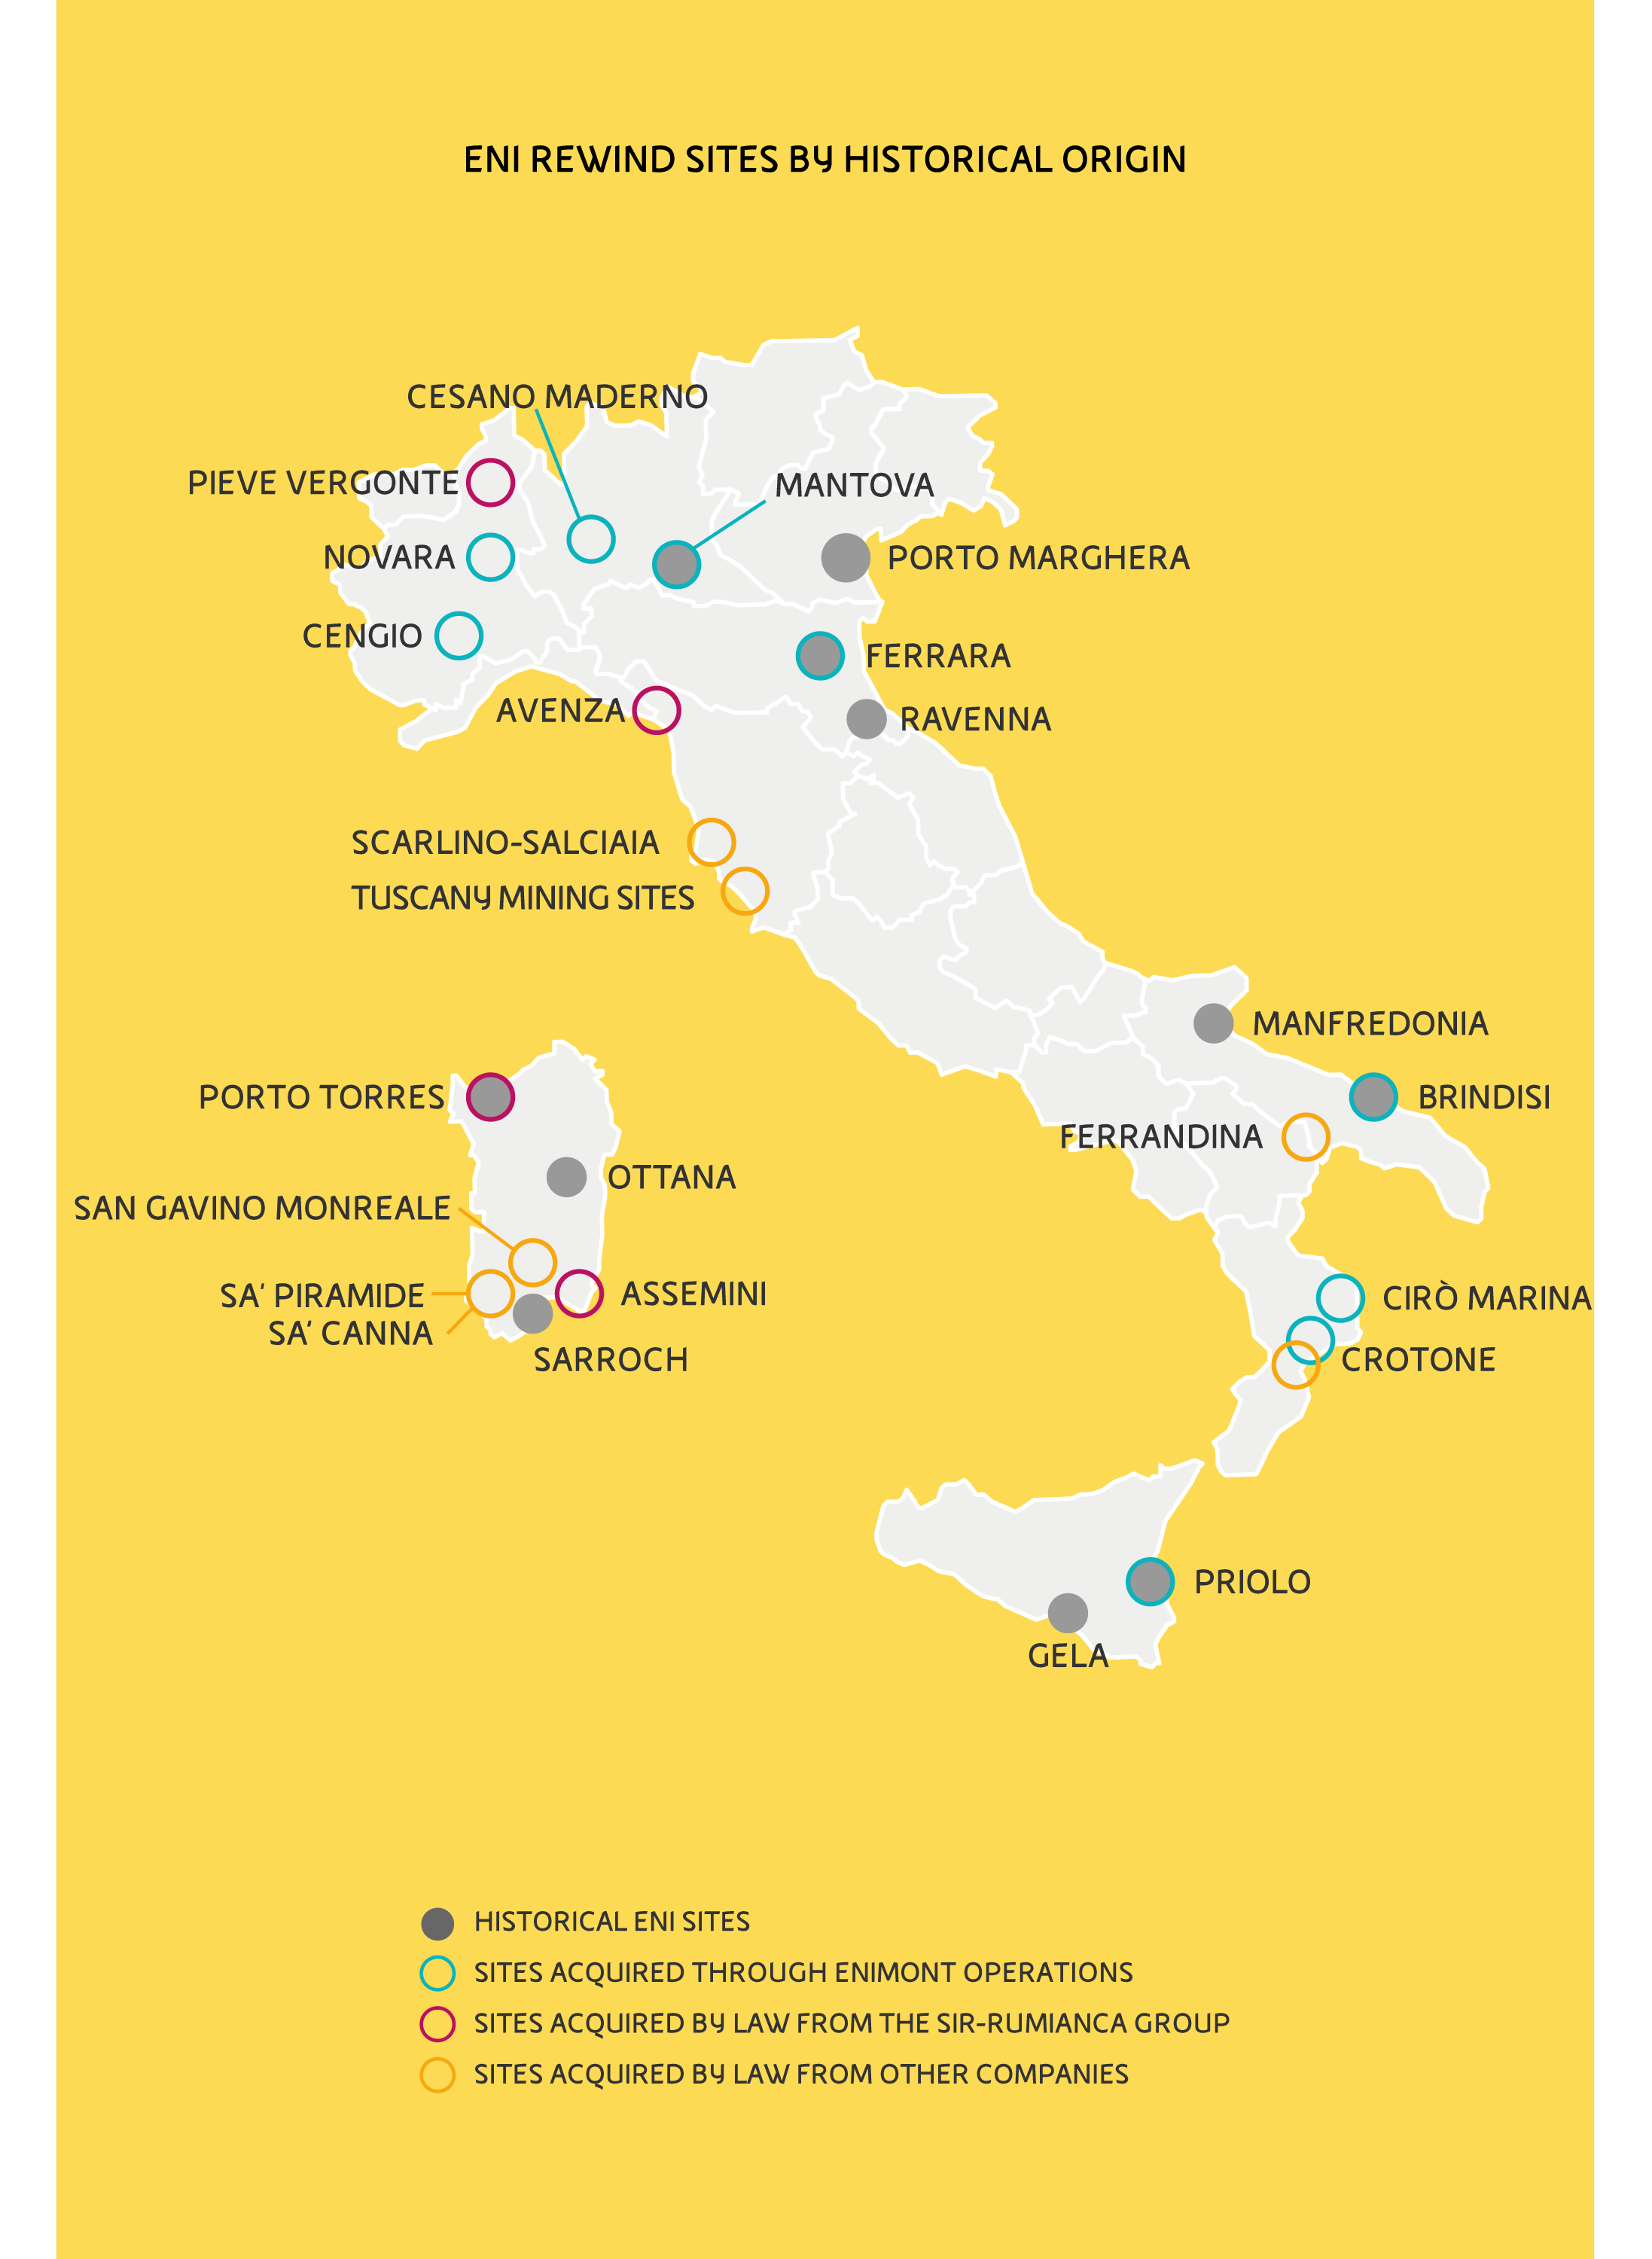 mappa-italia-sites-mobile.png